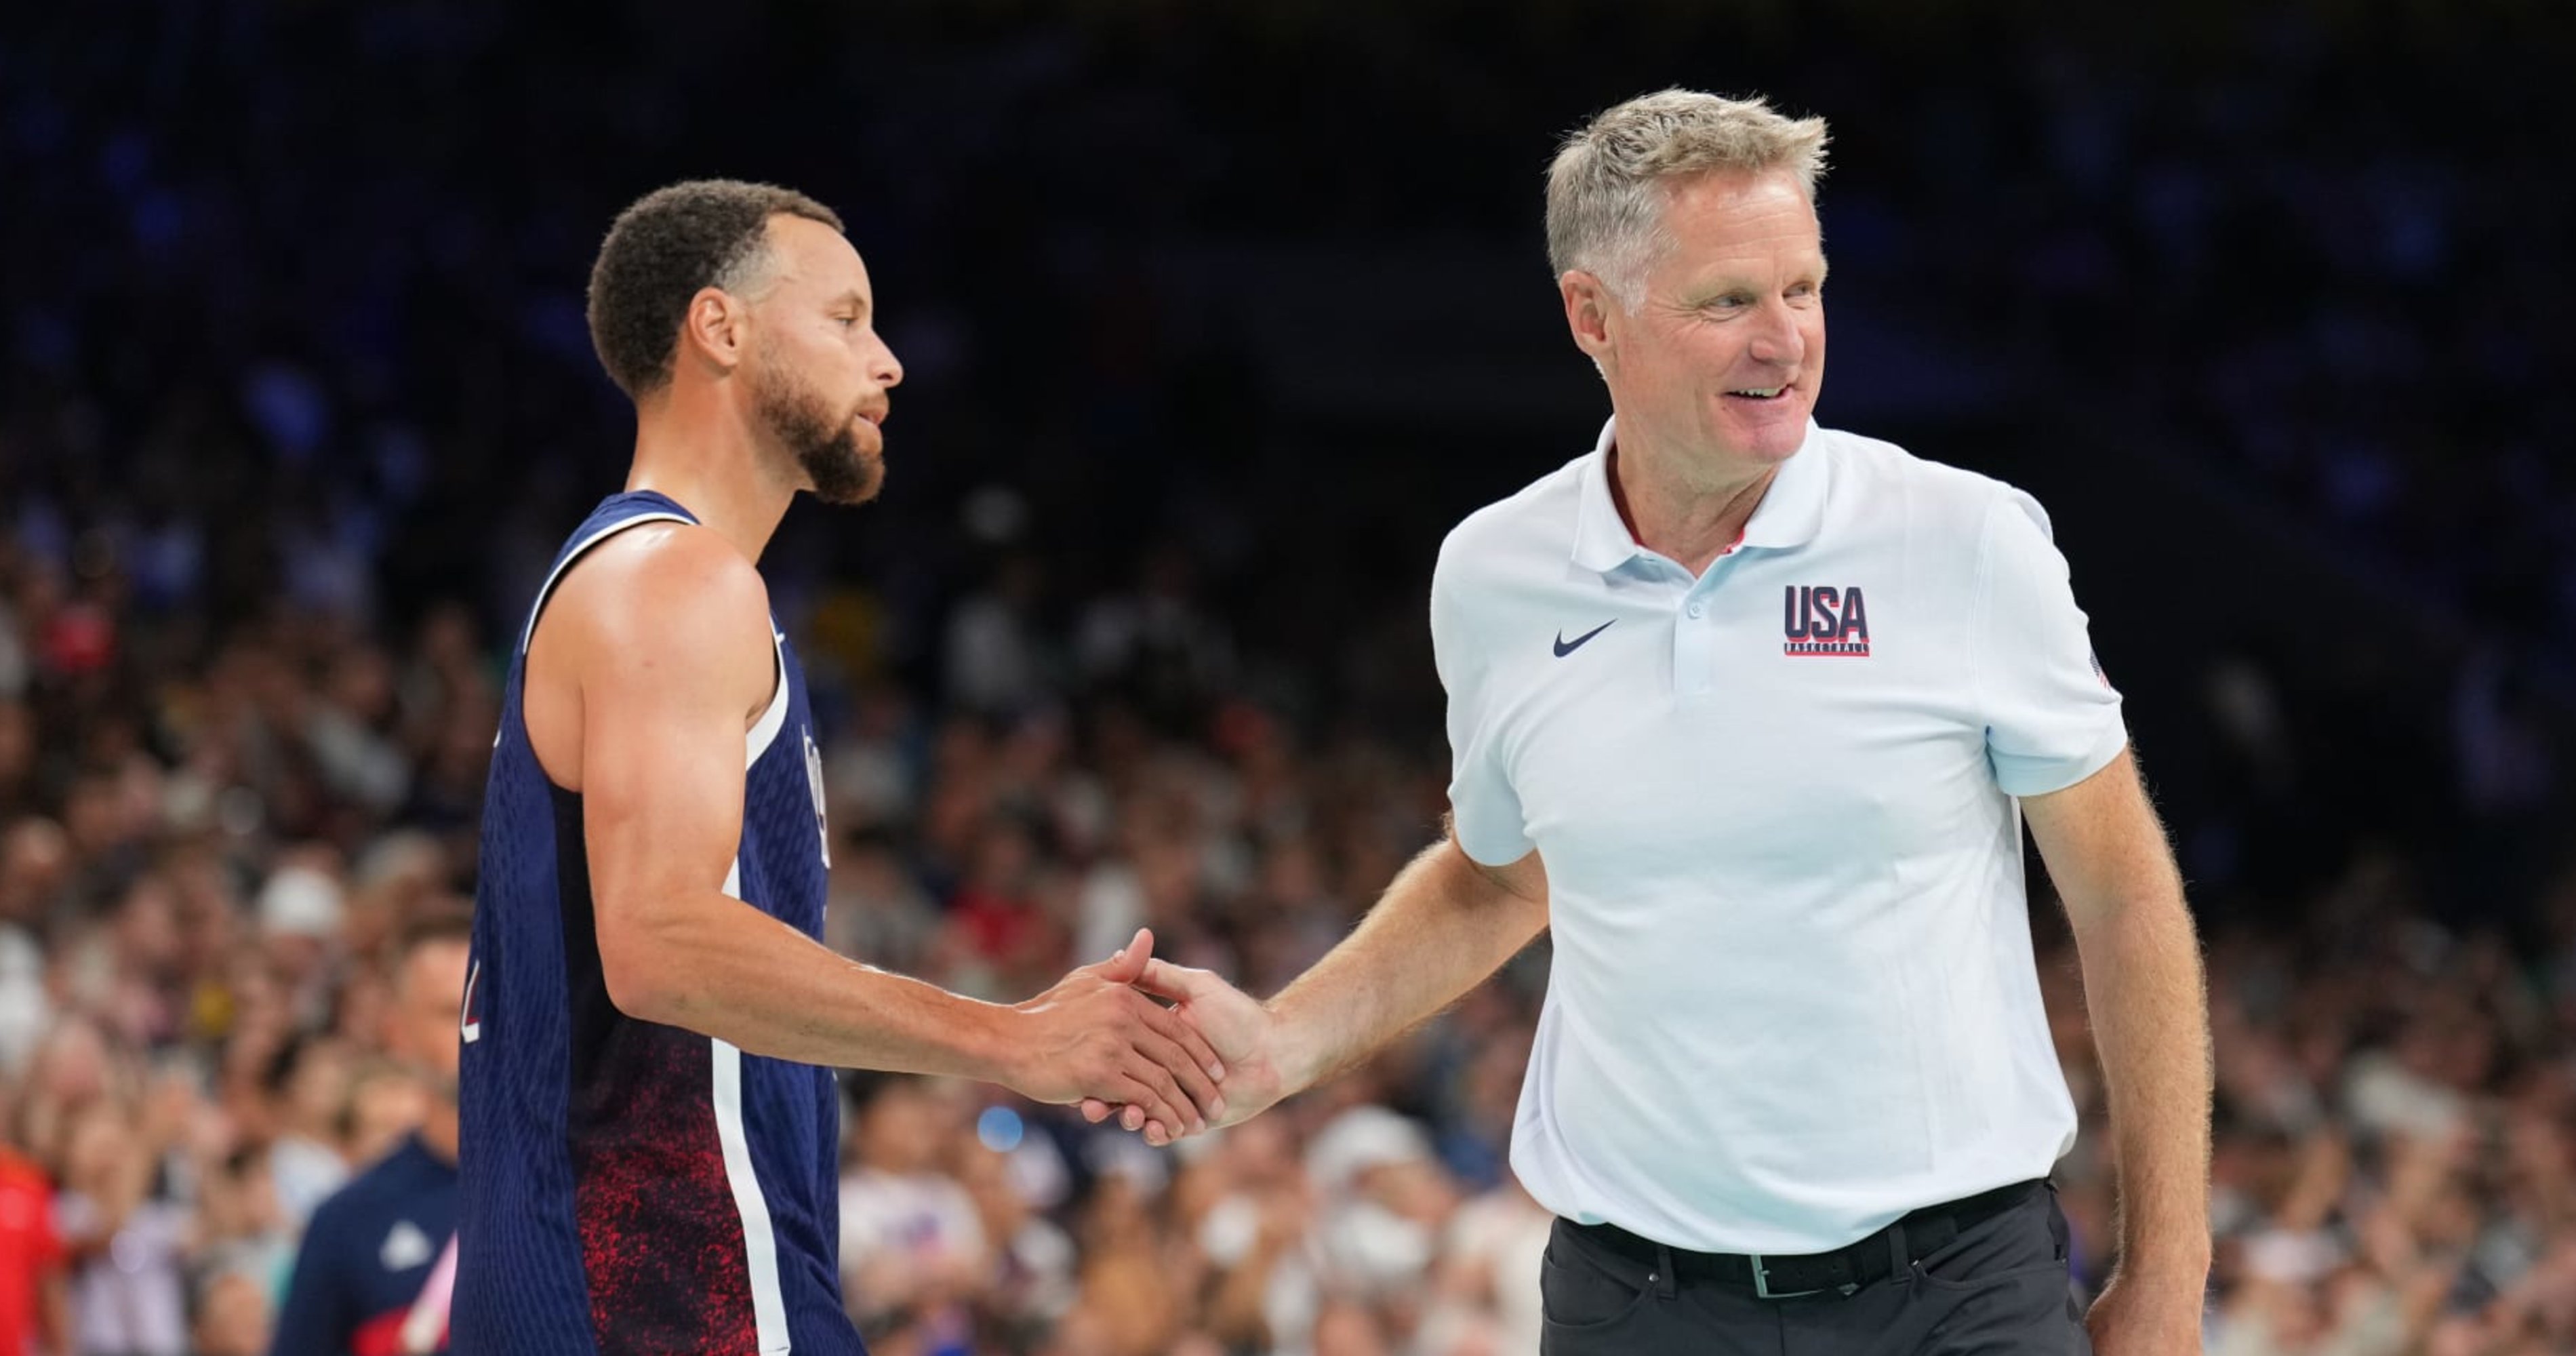 USA's Steve Kerr: 'We Know We Have to Play Better' in Olympic Knockout Bracket